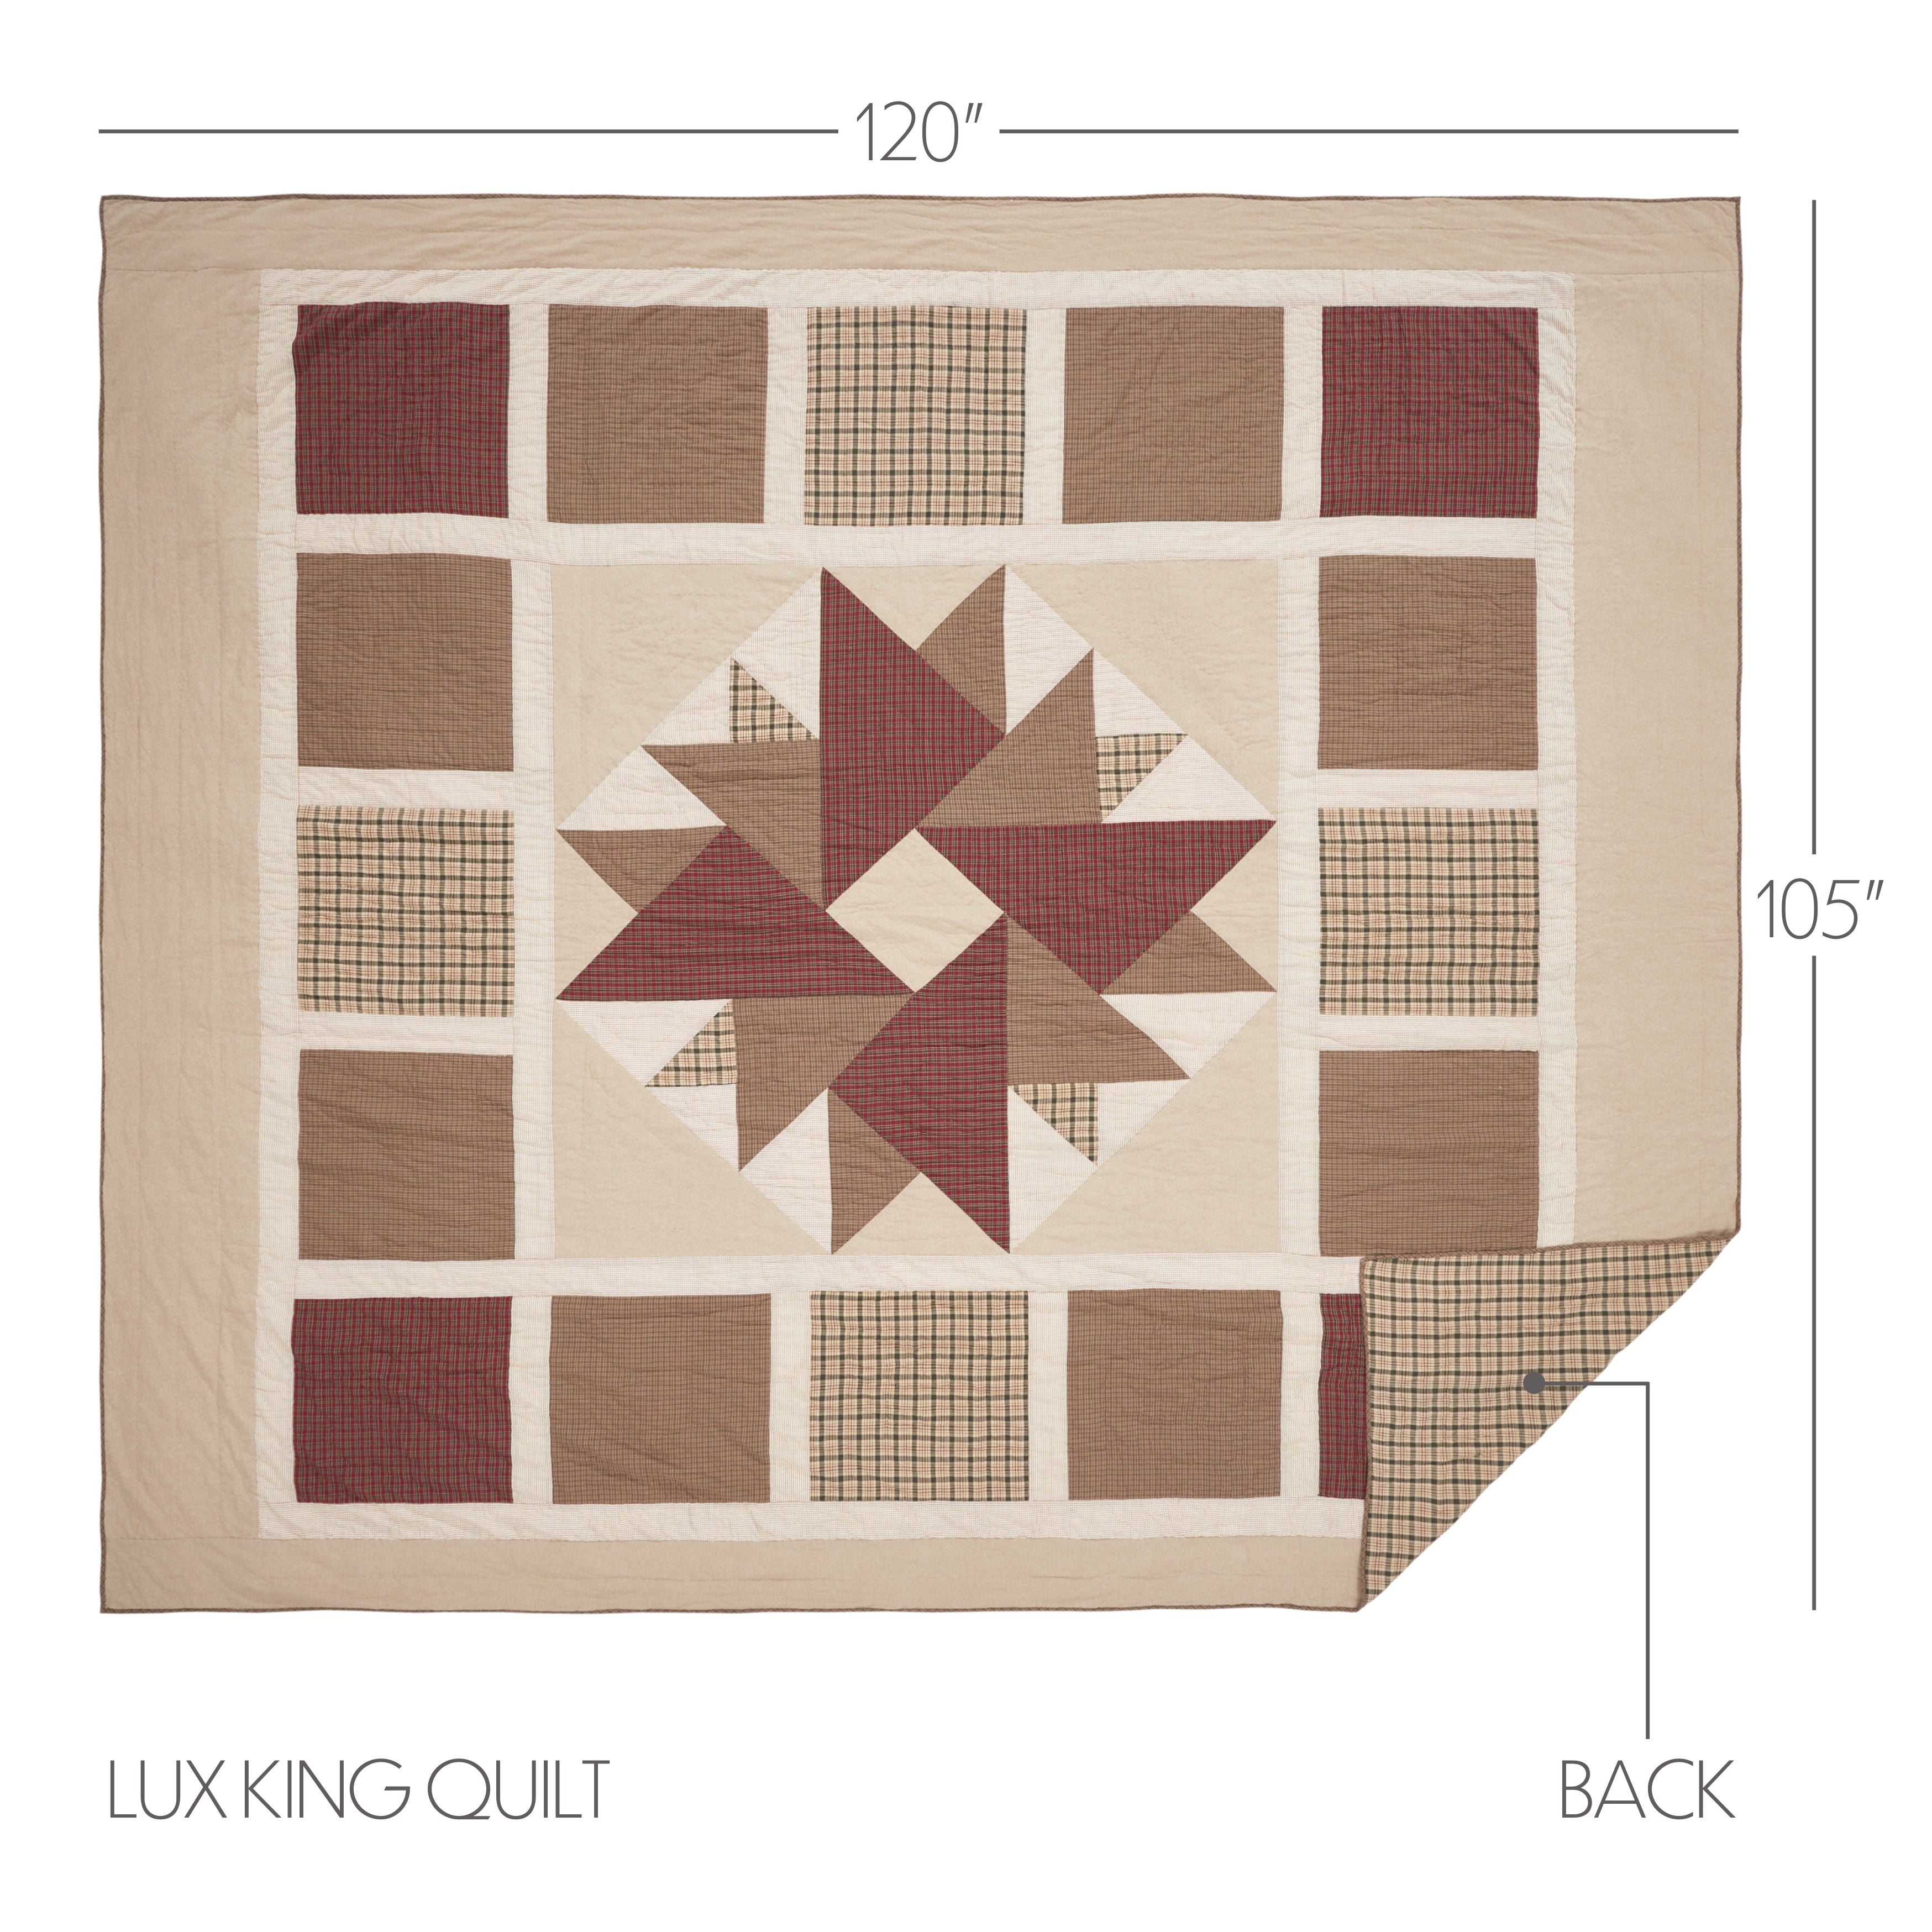 Cider Mill Luxury King Quilt 120Wx105L